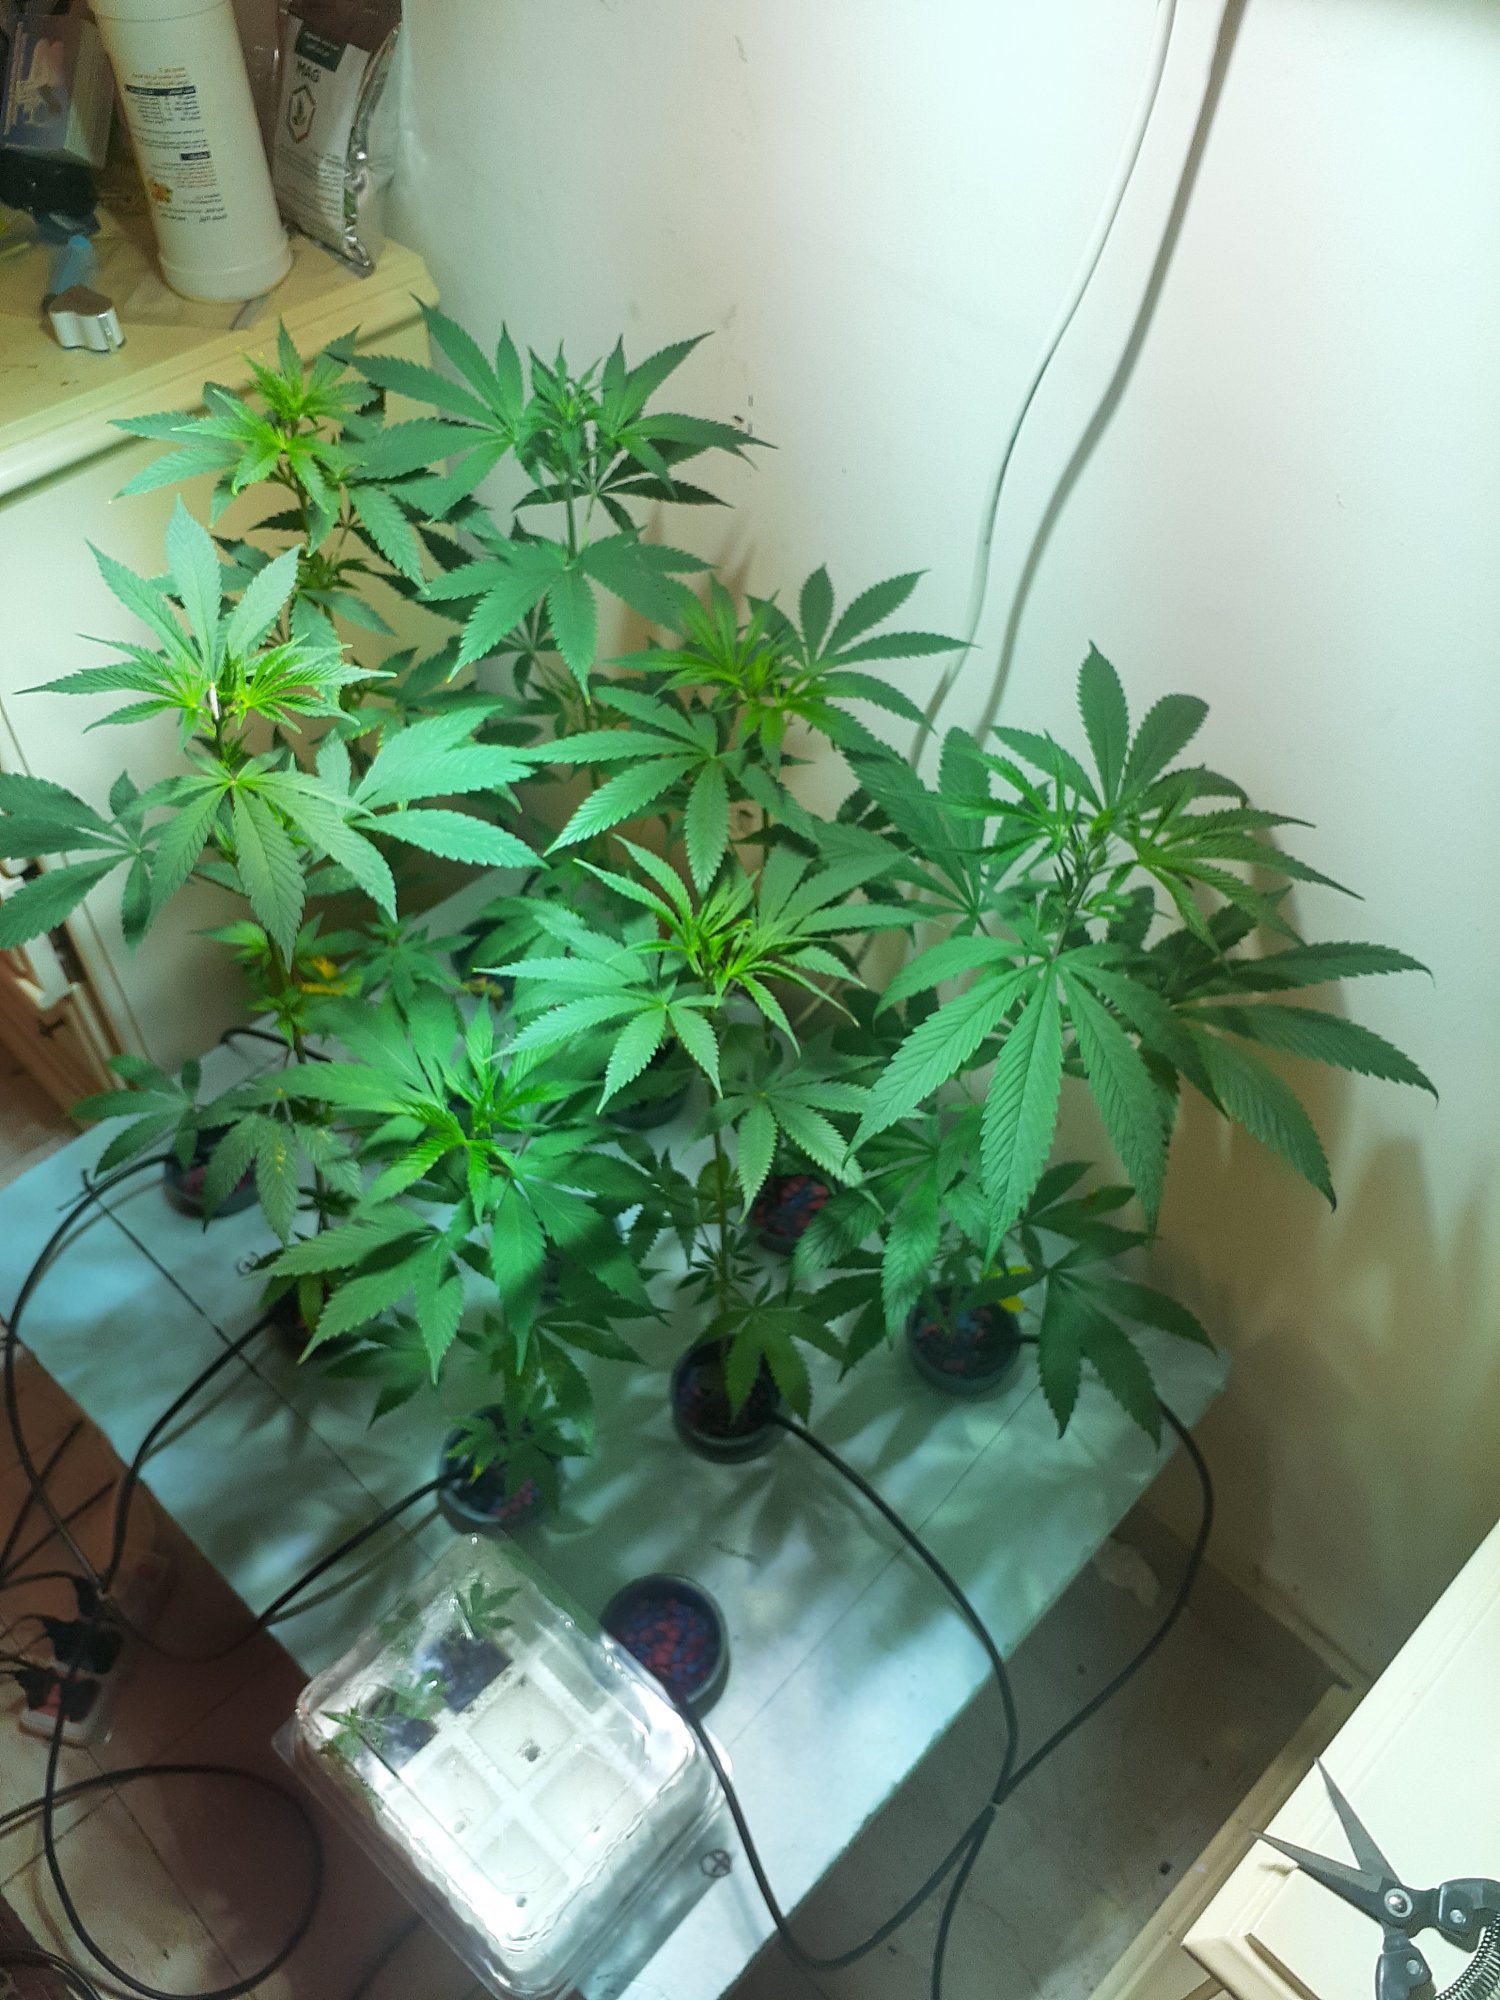 I grabbed some seeds from sinai first grow     indica or sativa